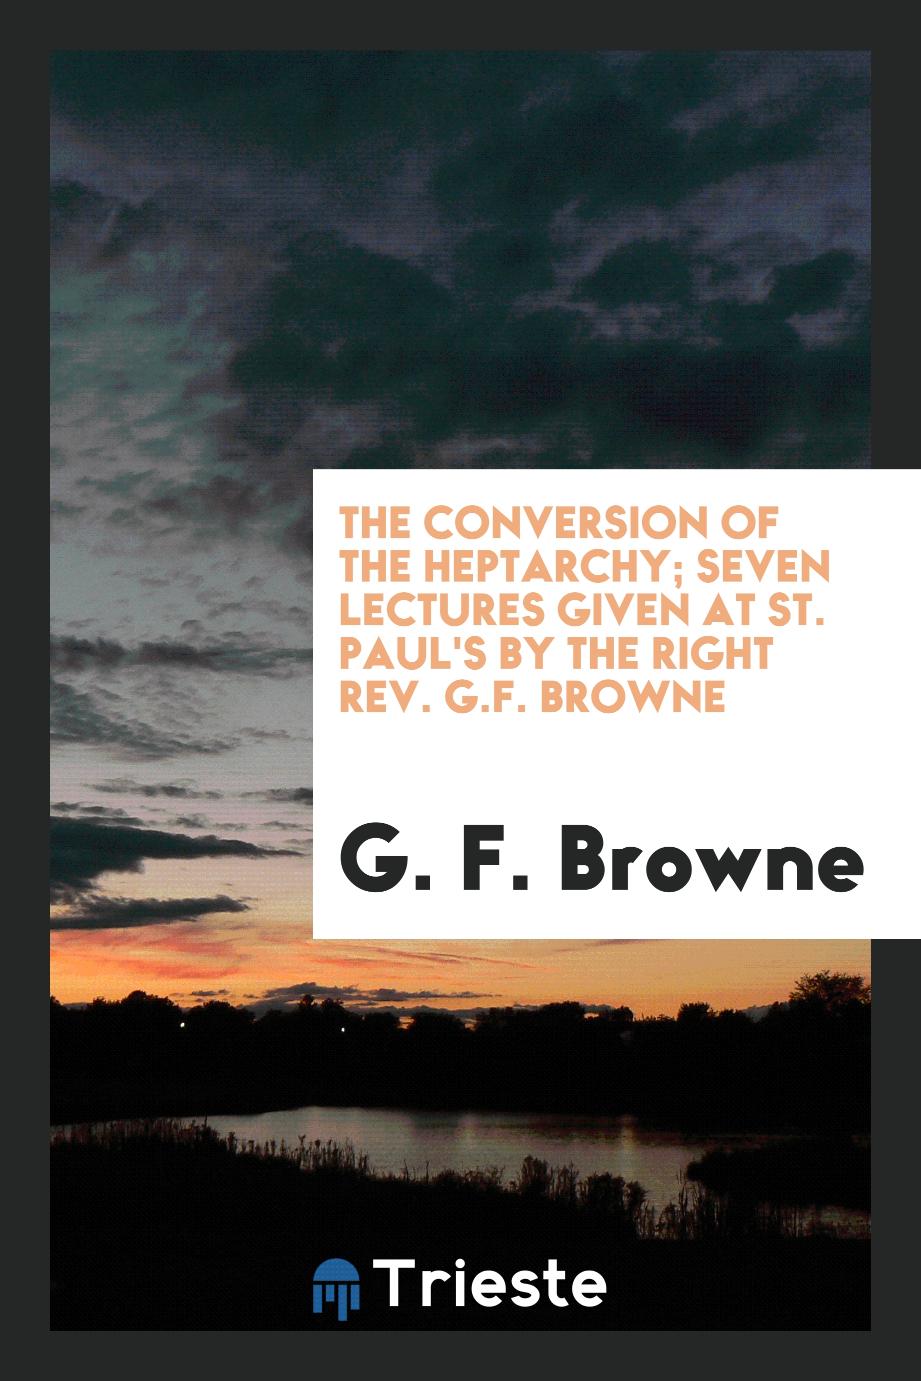 The conversion of the Heptarchy; seven lectures given at St. Paul's by the Right Rev. G.F. Browne